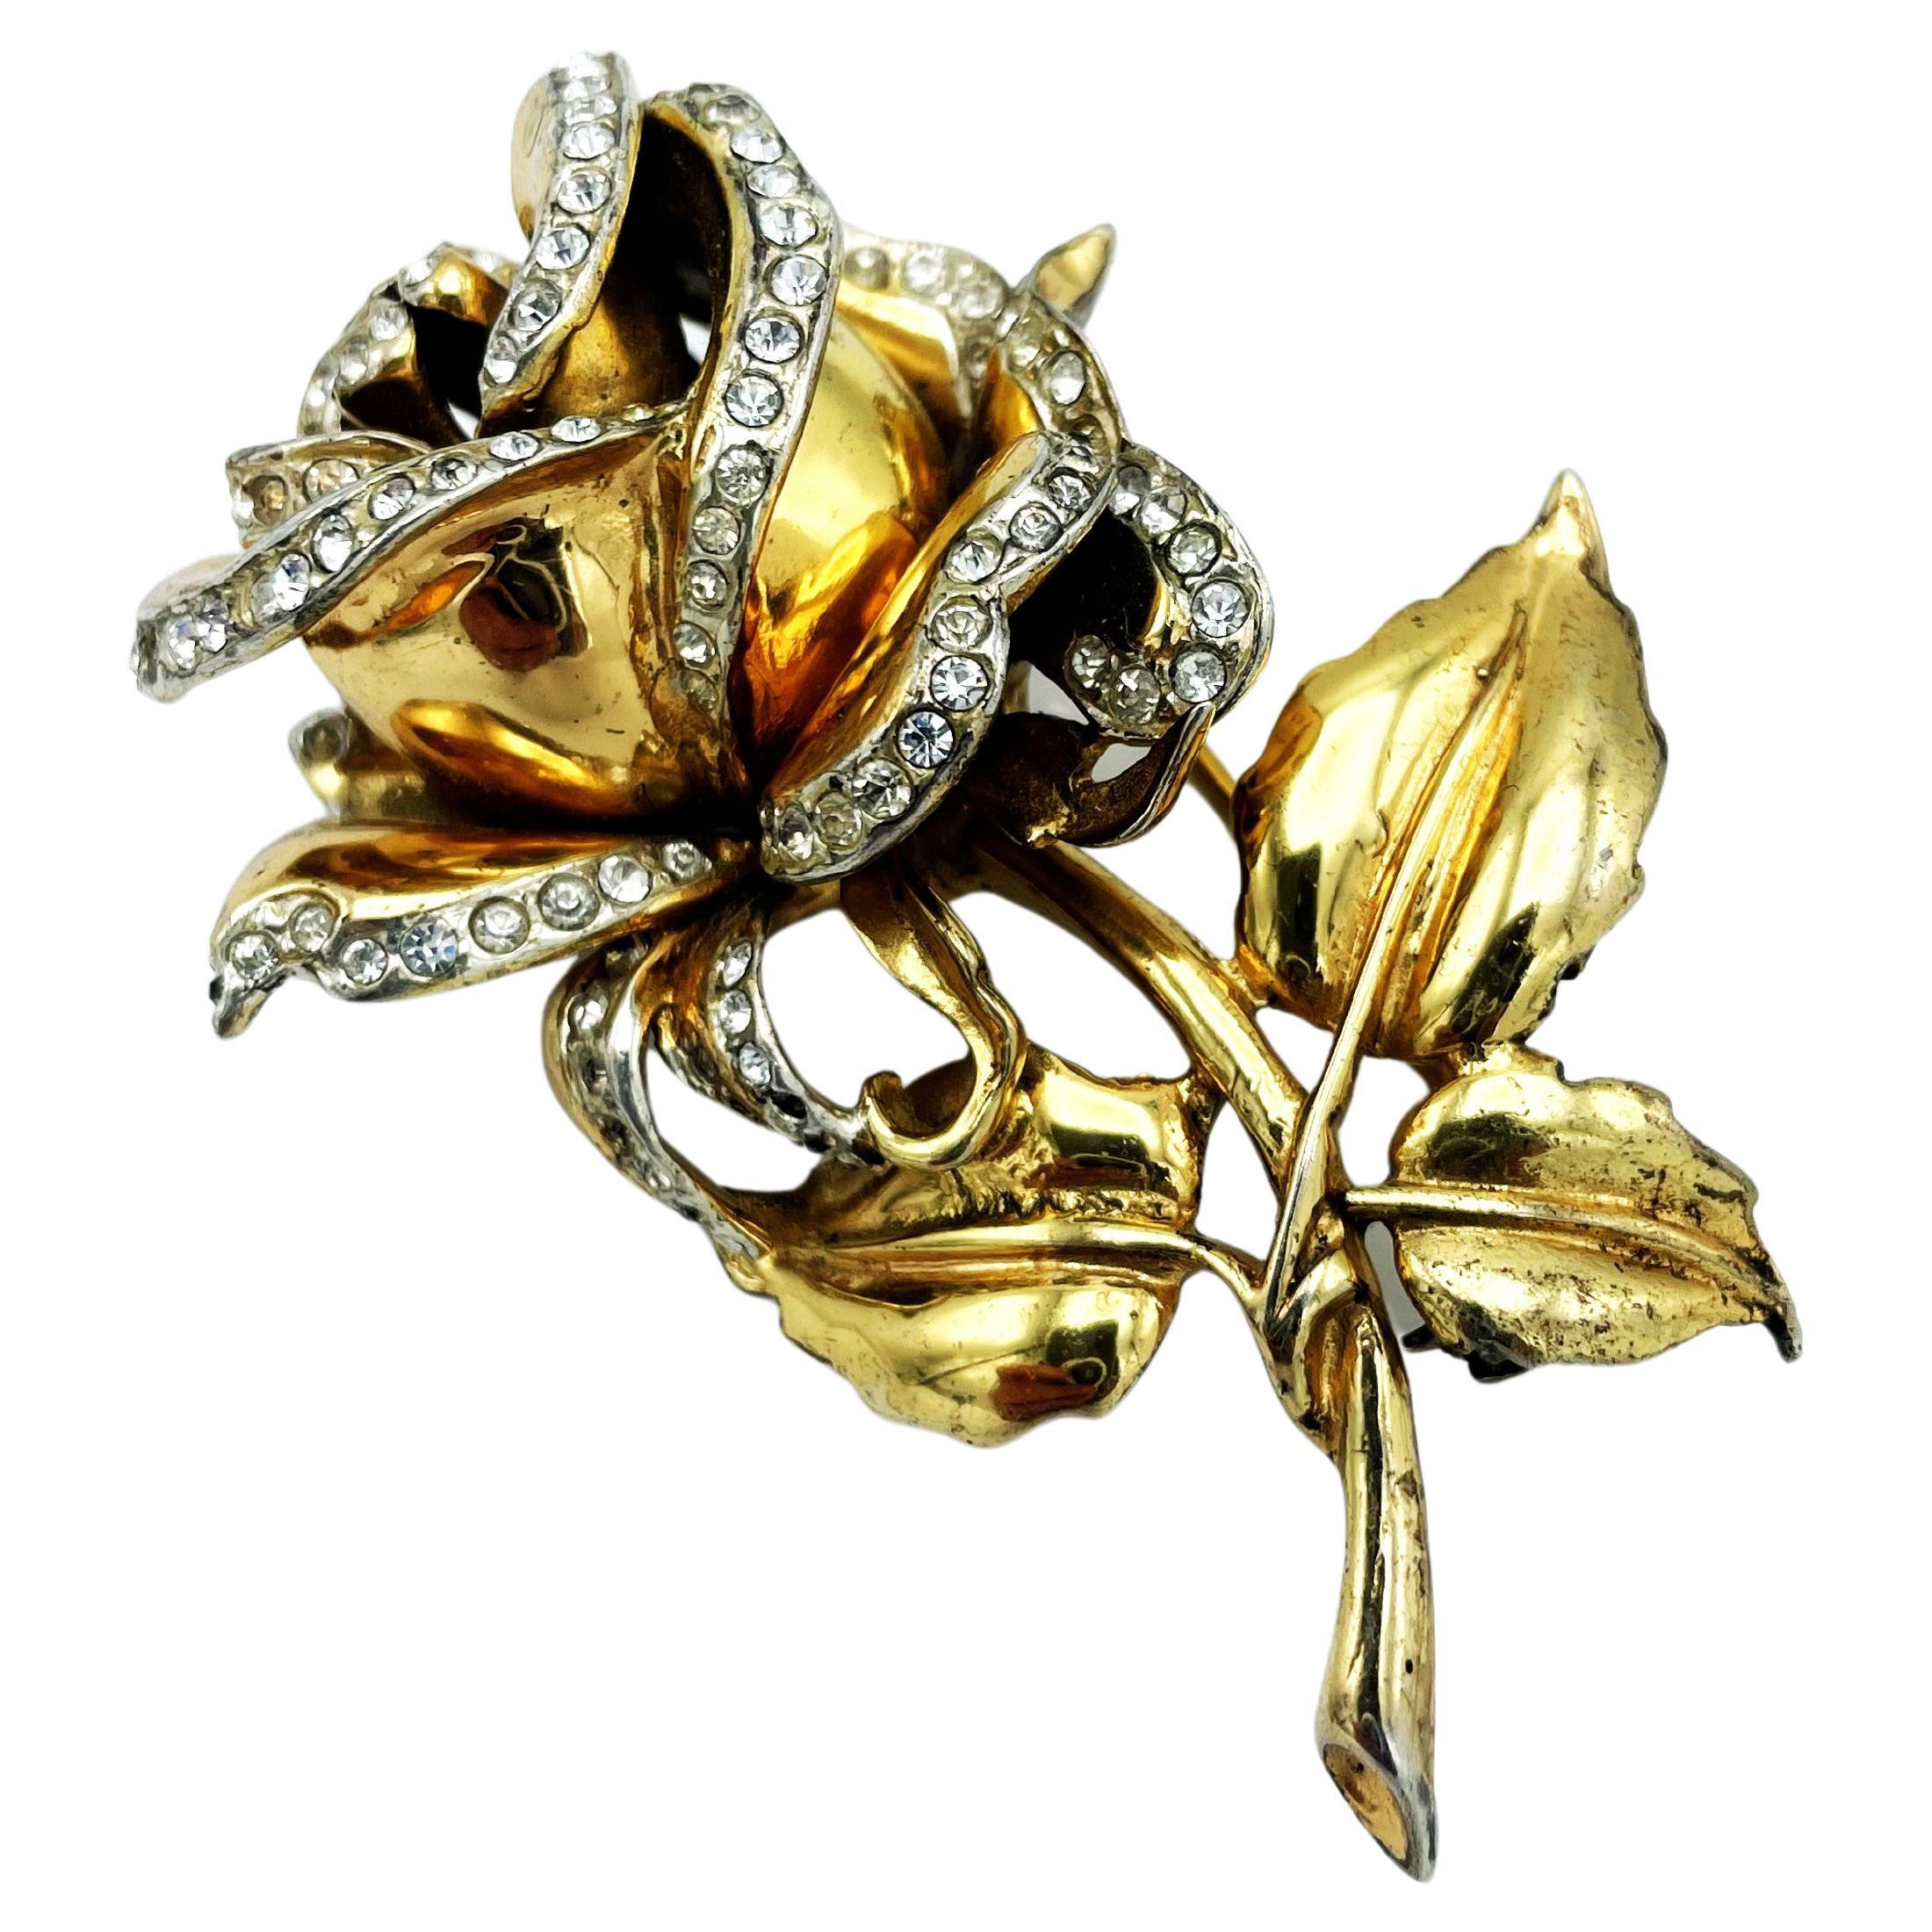 Coro Craft brooch in the shape of a rose, sterling gold plated, rhinestones 1940